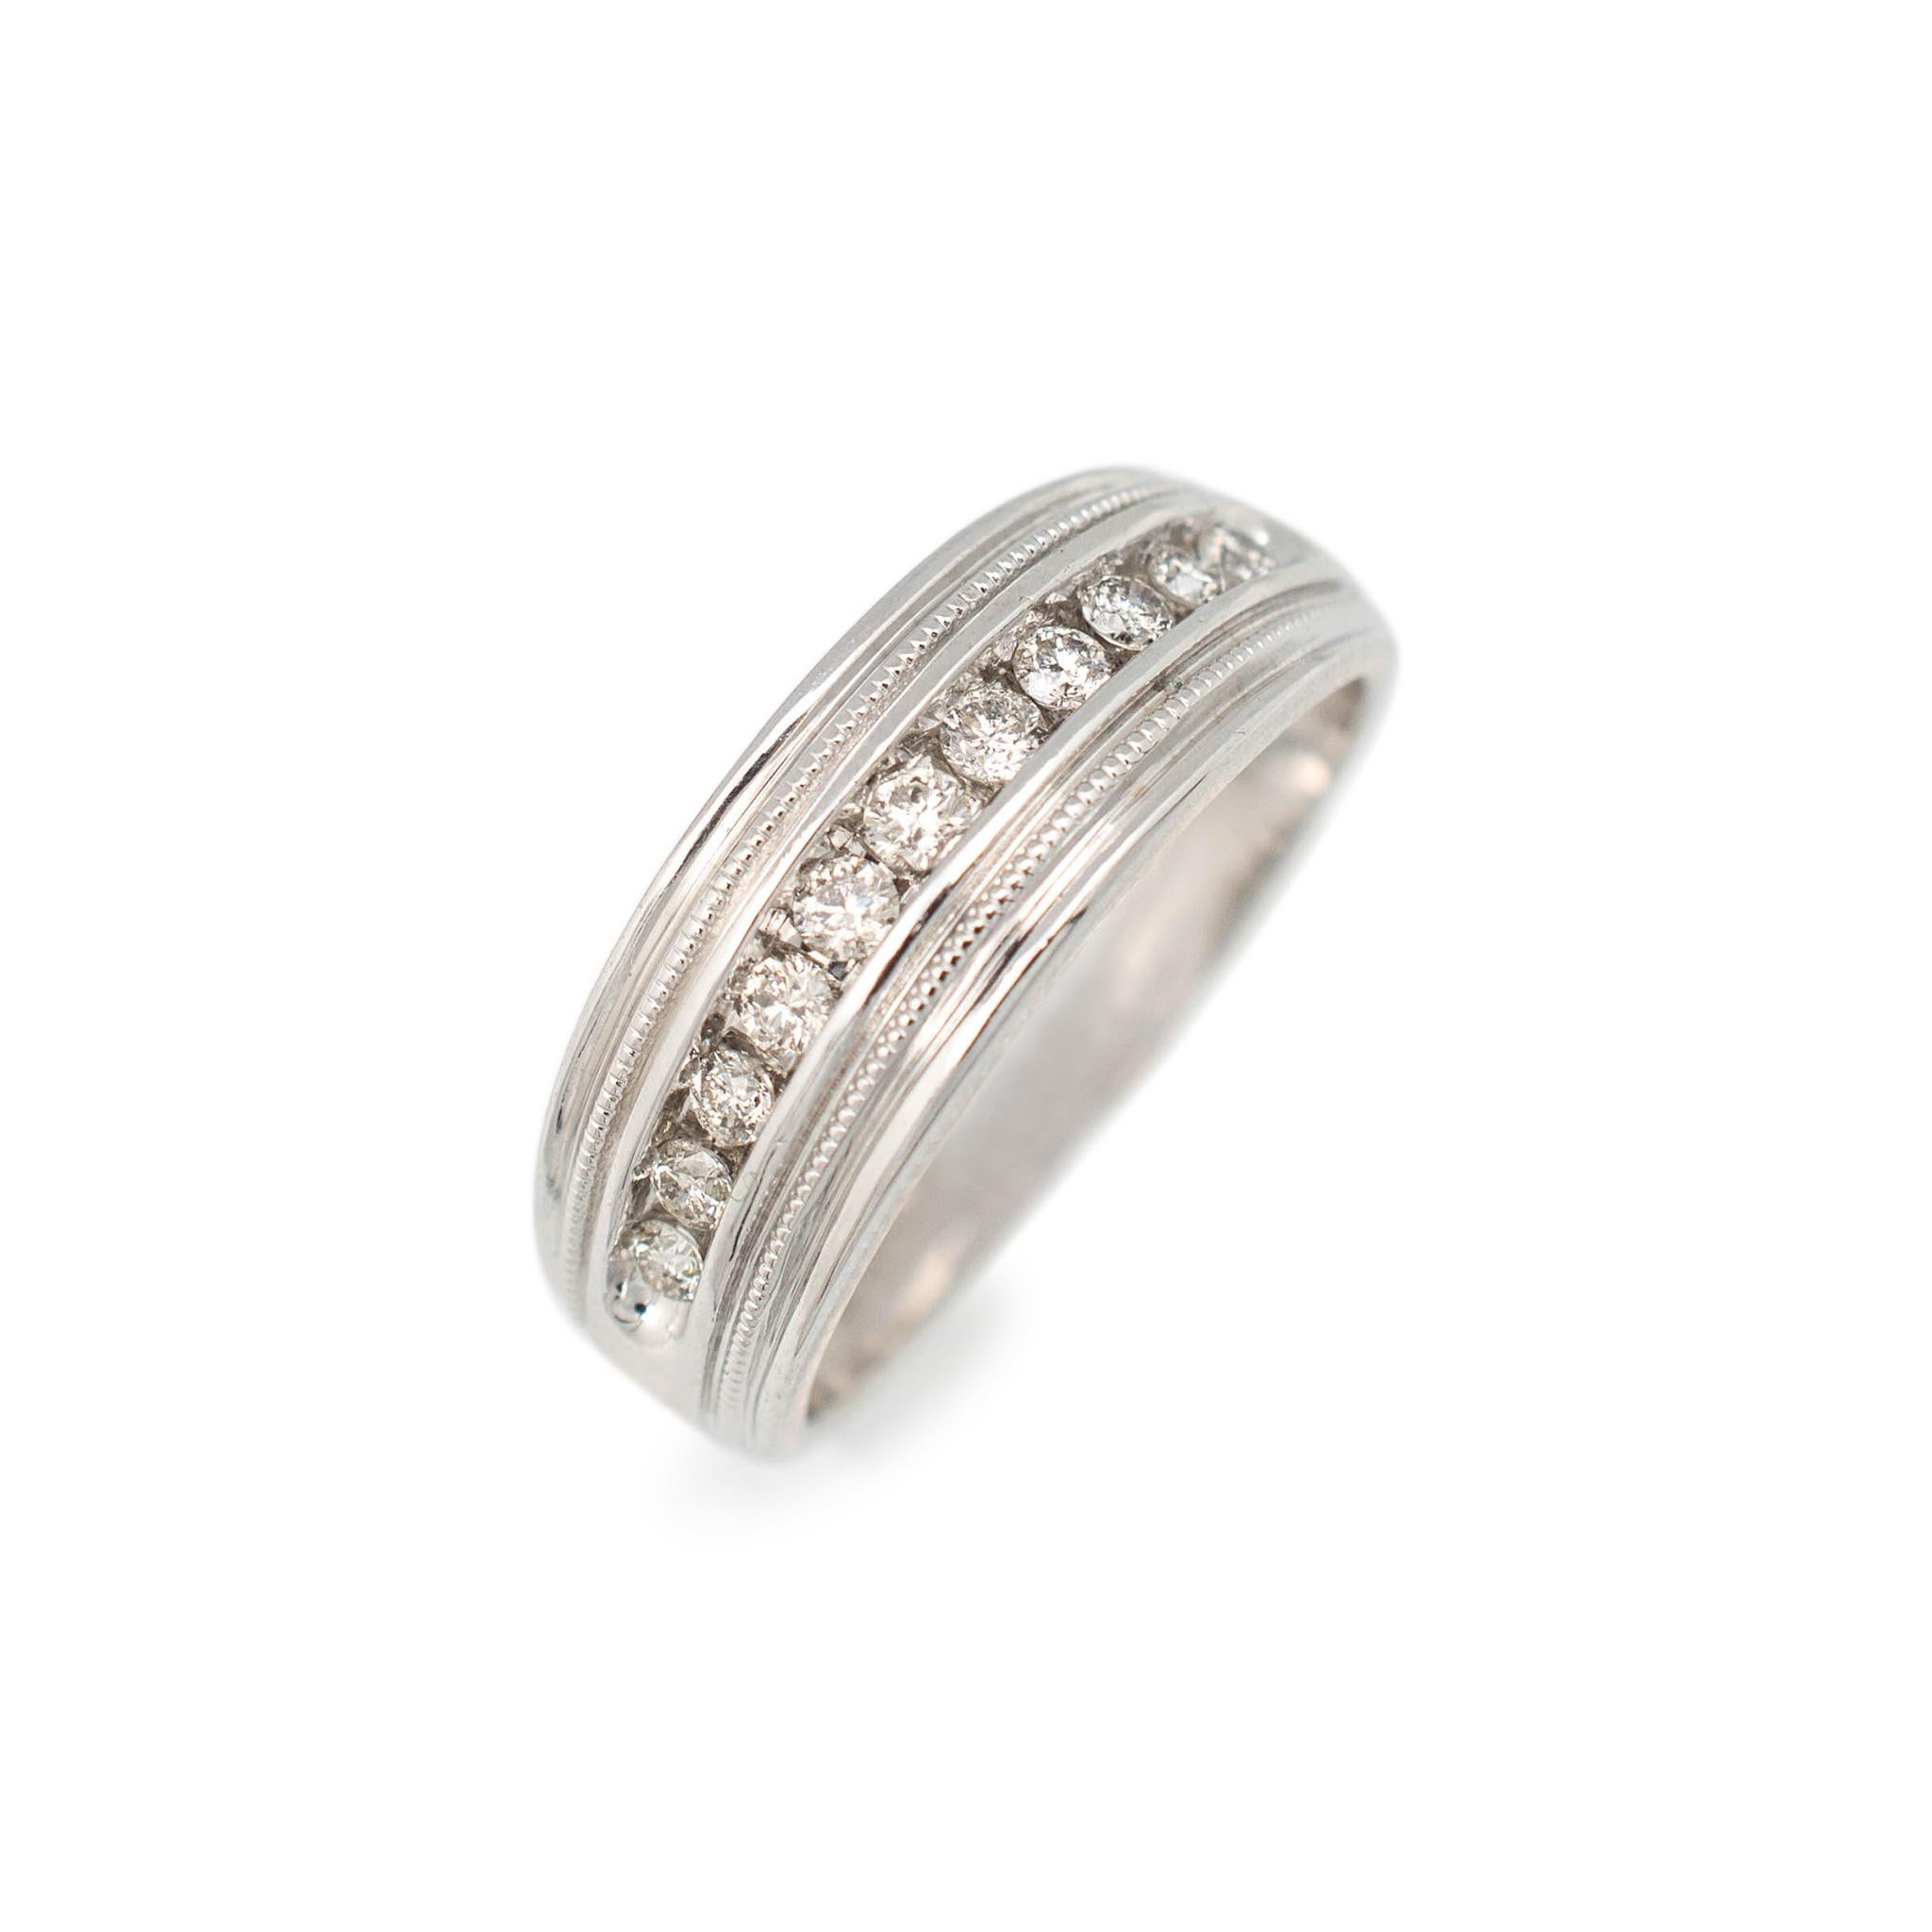 Gender: Mens

Material: 14K white gold

Size: 11.5

Shank Width: 8.45 mm tapering to 2.80 mm

Weight: 7.70 grams

Men's 14K white gold, diamond wedding band with a half-round shank. Stamped 